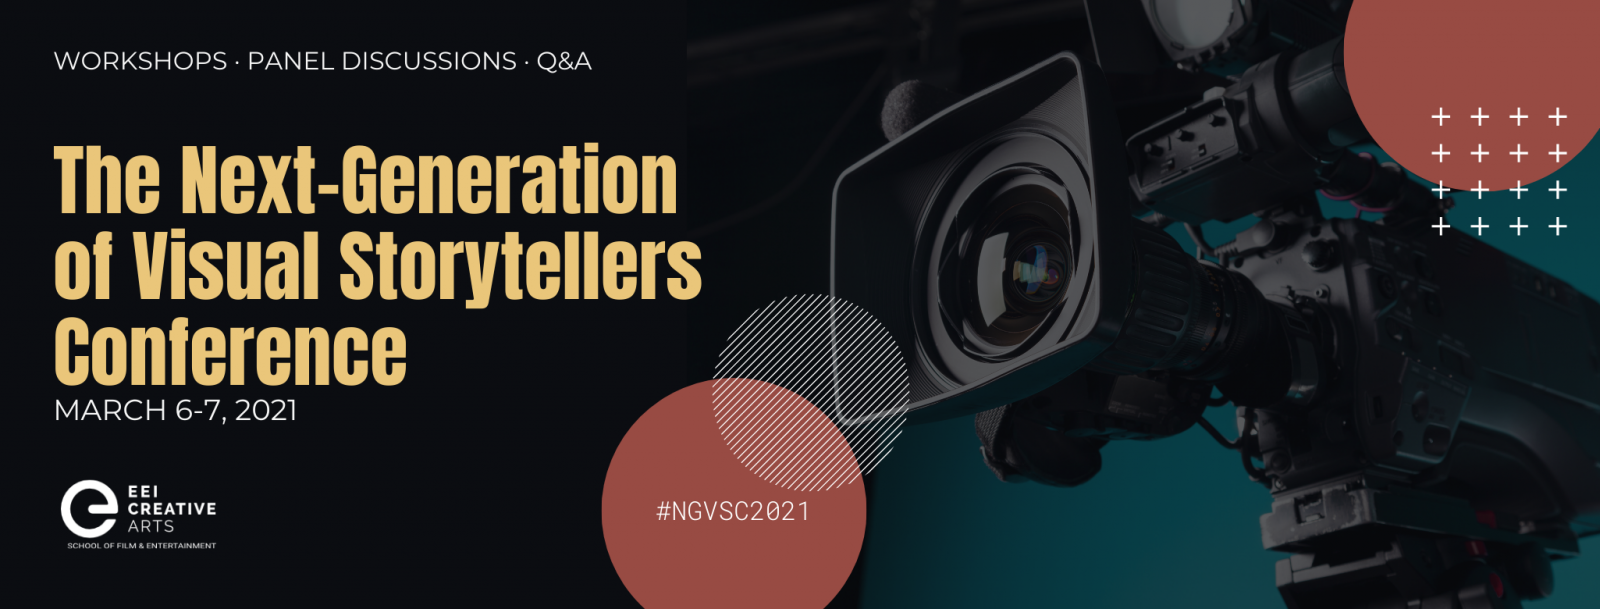 NEXT-GENERATION OF VISUAL STORYTELLERS CONFERENCE (4).png